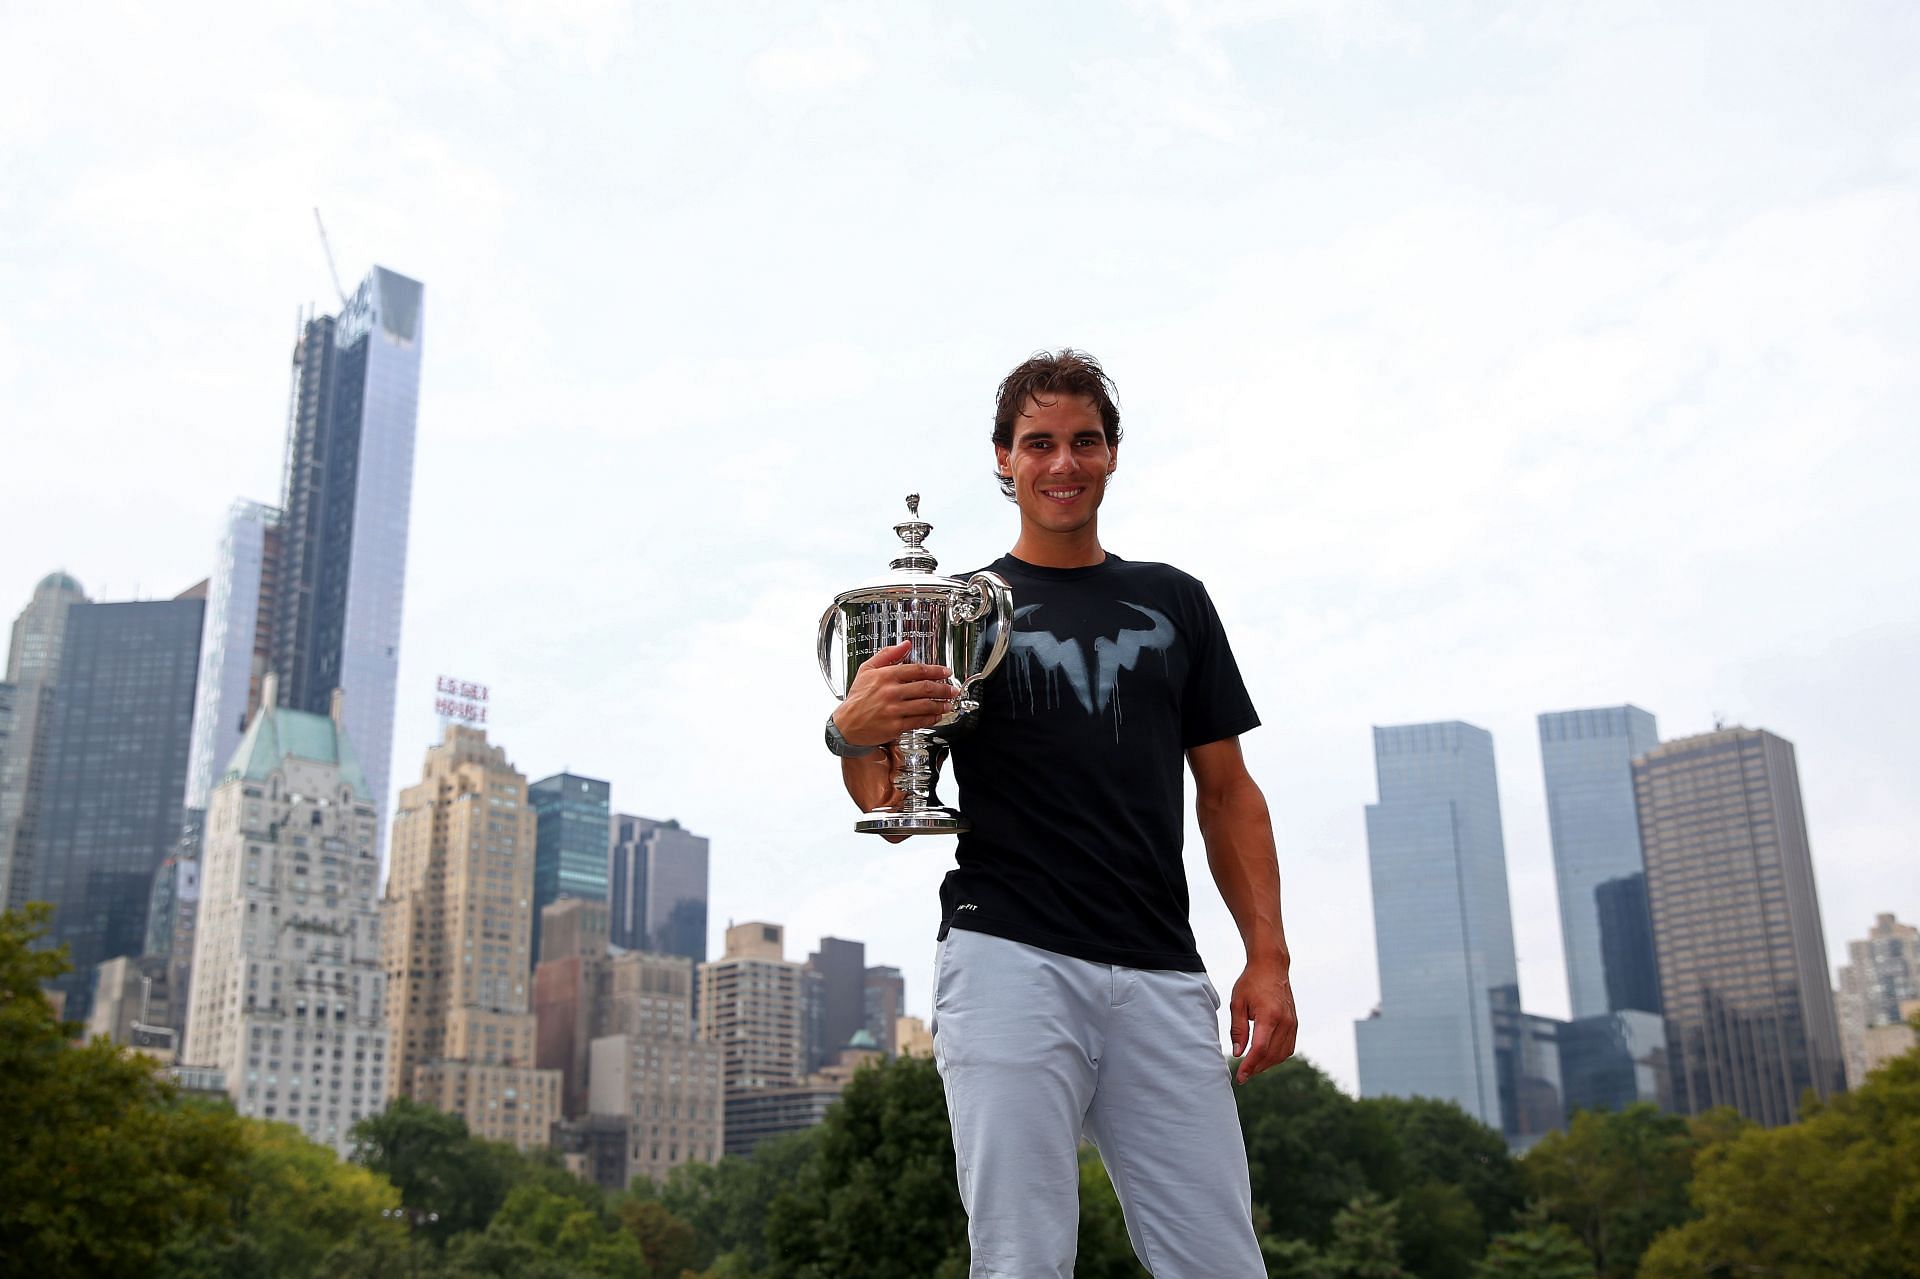 Rafael Nadal with the US Open trophy in 2013